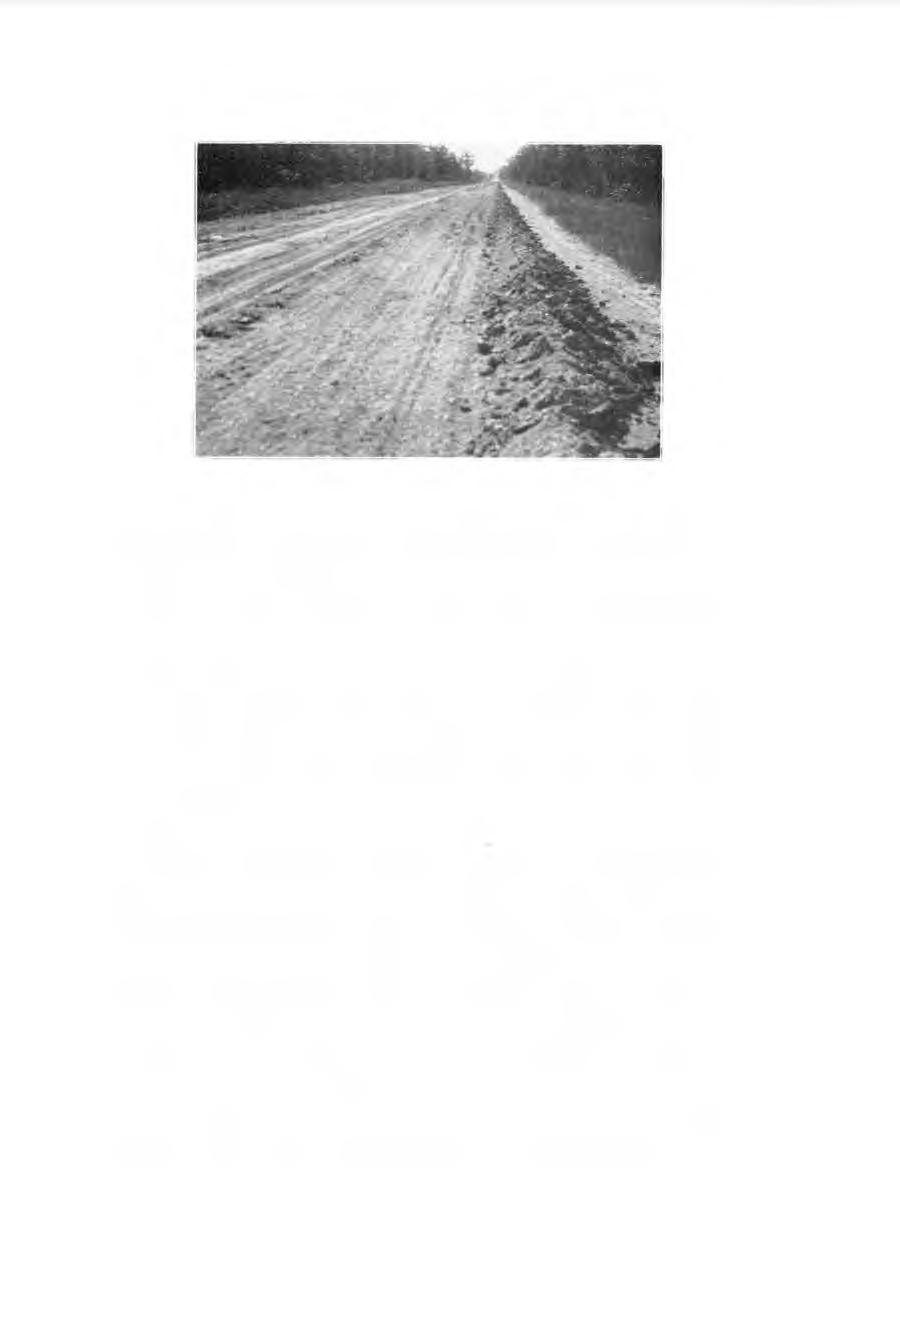 Fig. 6. Windrows of clay and gravel on shoulders. gravel back and forth on the road surface to aid in drying and pulverizing it.